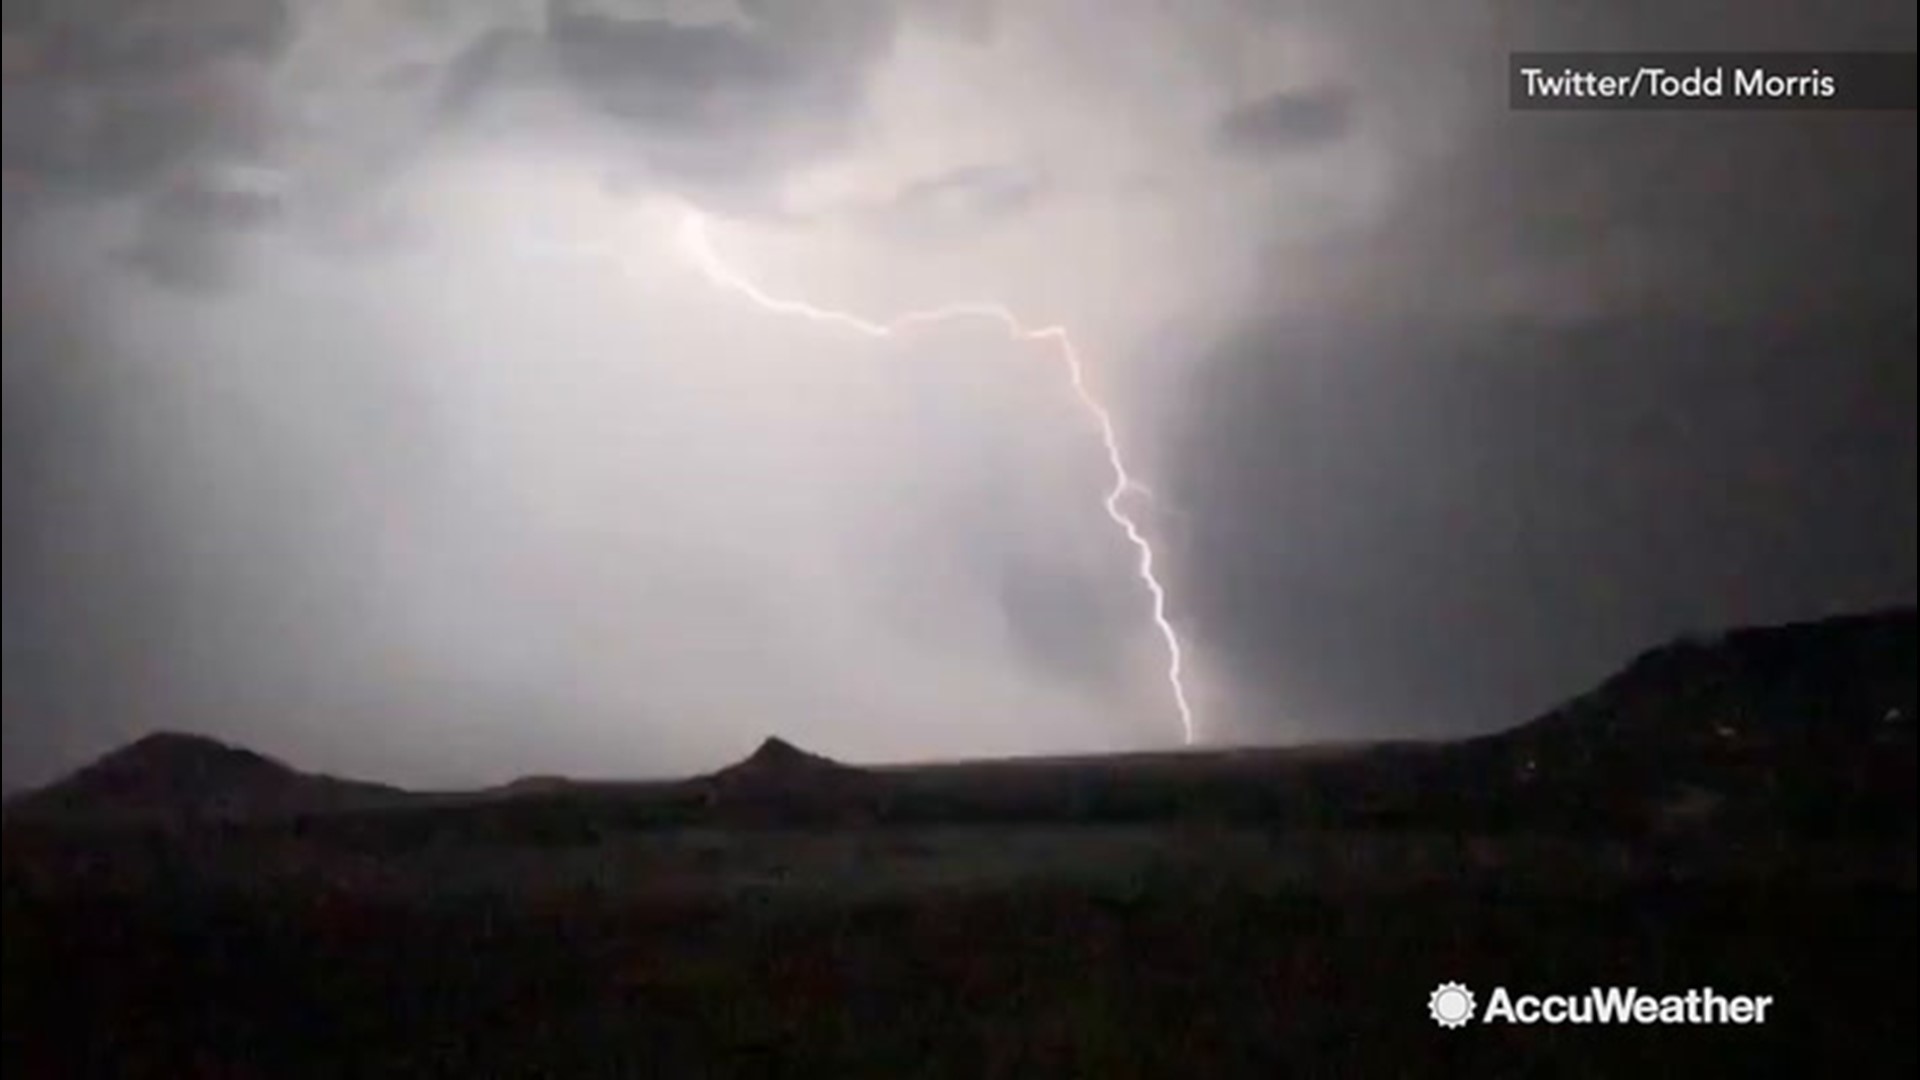 Monsoon Season kicked into gear as thunderstorms erupted across the desert. Twitter user Todd Morris caught these stunning cloud-to-ground lightning strikes in slow-motion from Fountain Hills, Arizona, on July 22.